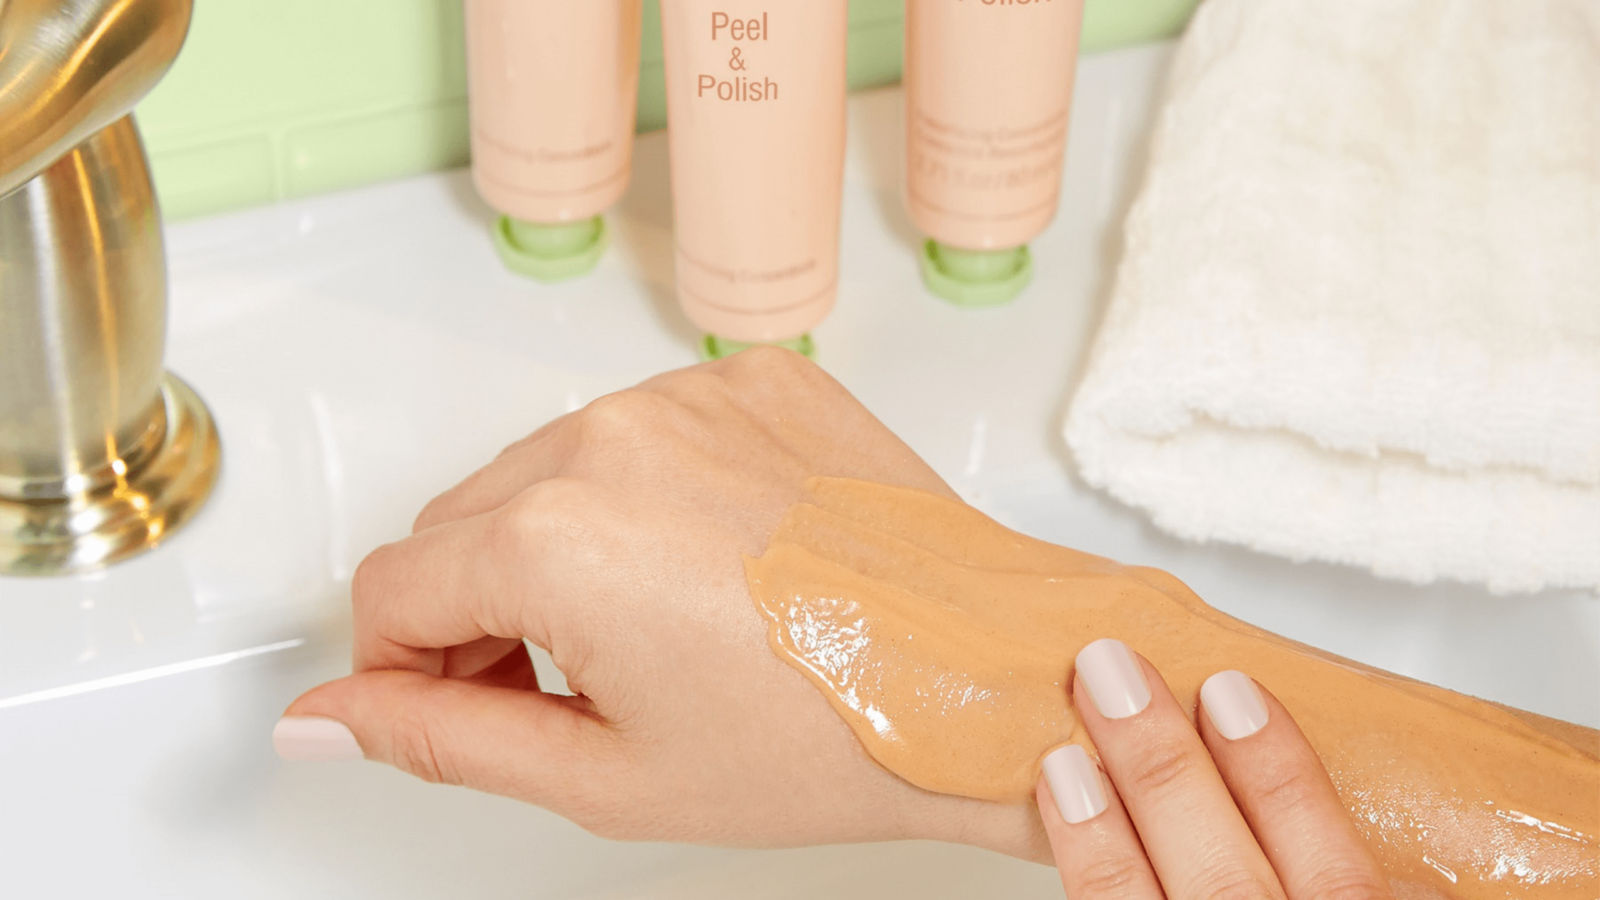 How to exfoliate your skin: a basic guide to get you started